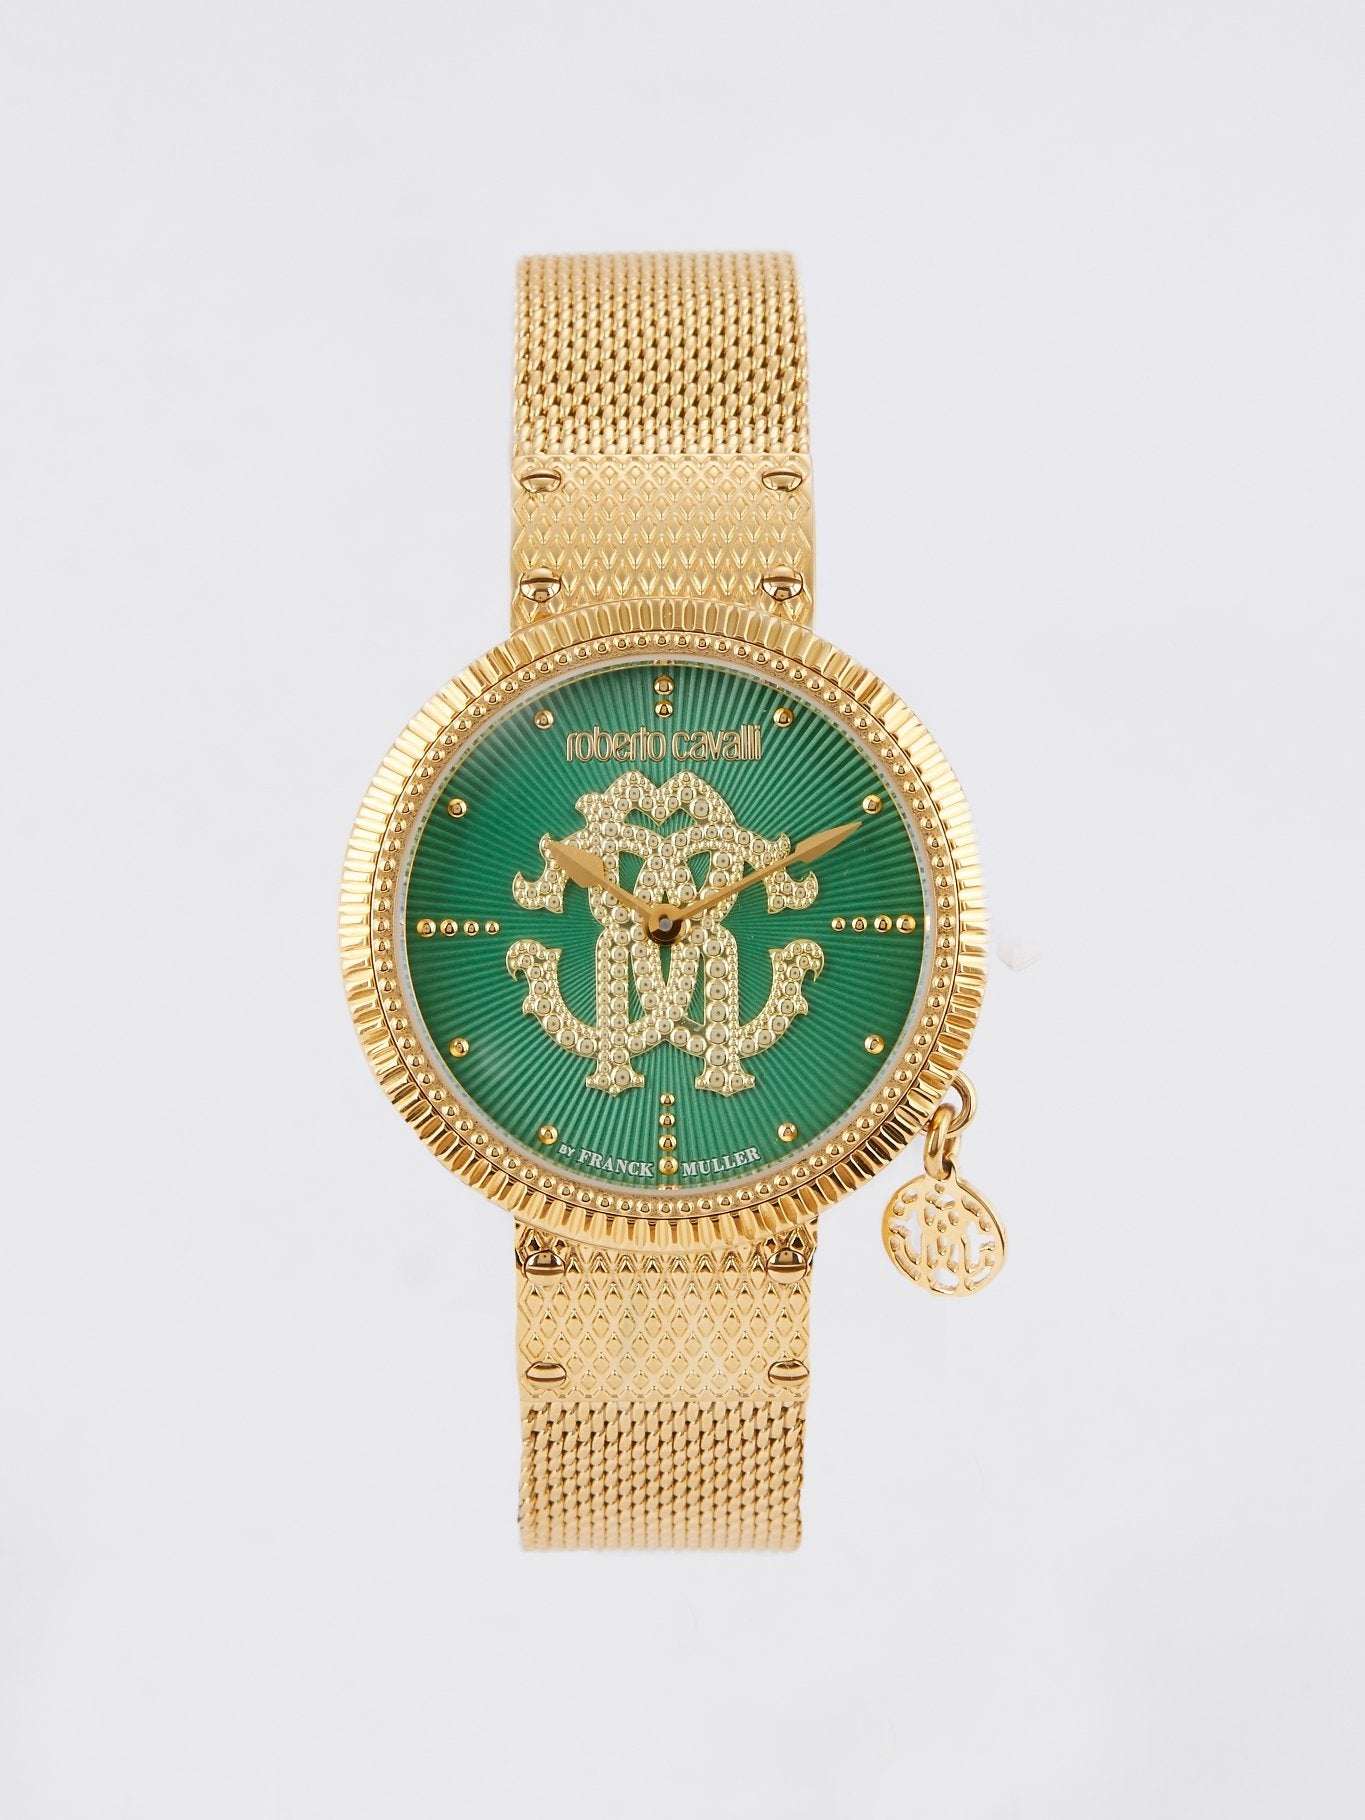 Roberto Cavalli by Franck Muller Gold Tone Watch